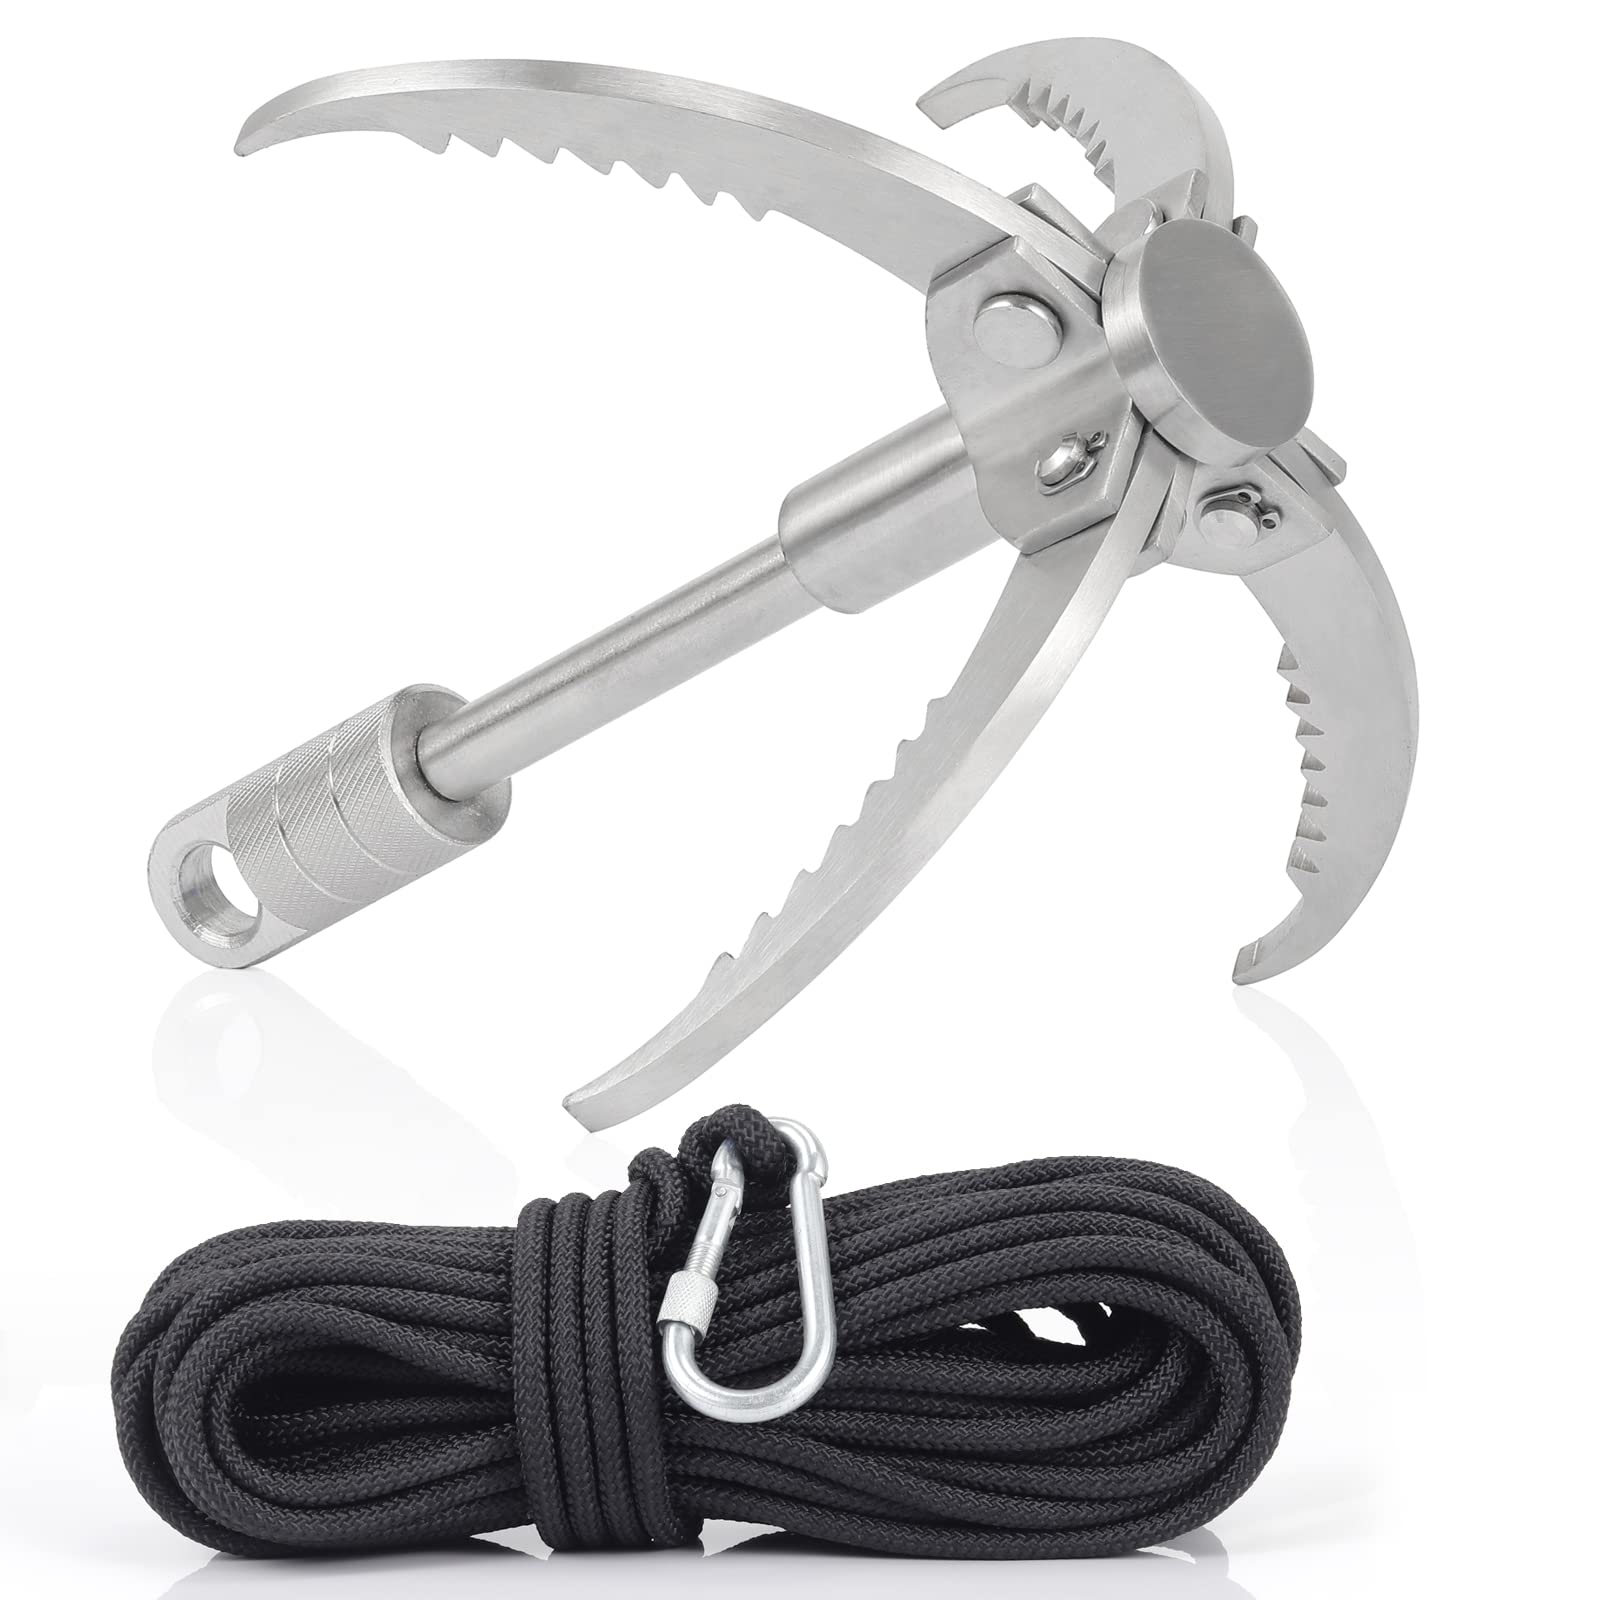 Vinida Grappling Hook - Gravity Hook Multifunctional Stainless Steel  Survival Folding Climbing Claw Gravity Carabiner For Outdoor Life Prices, Shop Deals Online